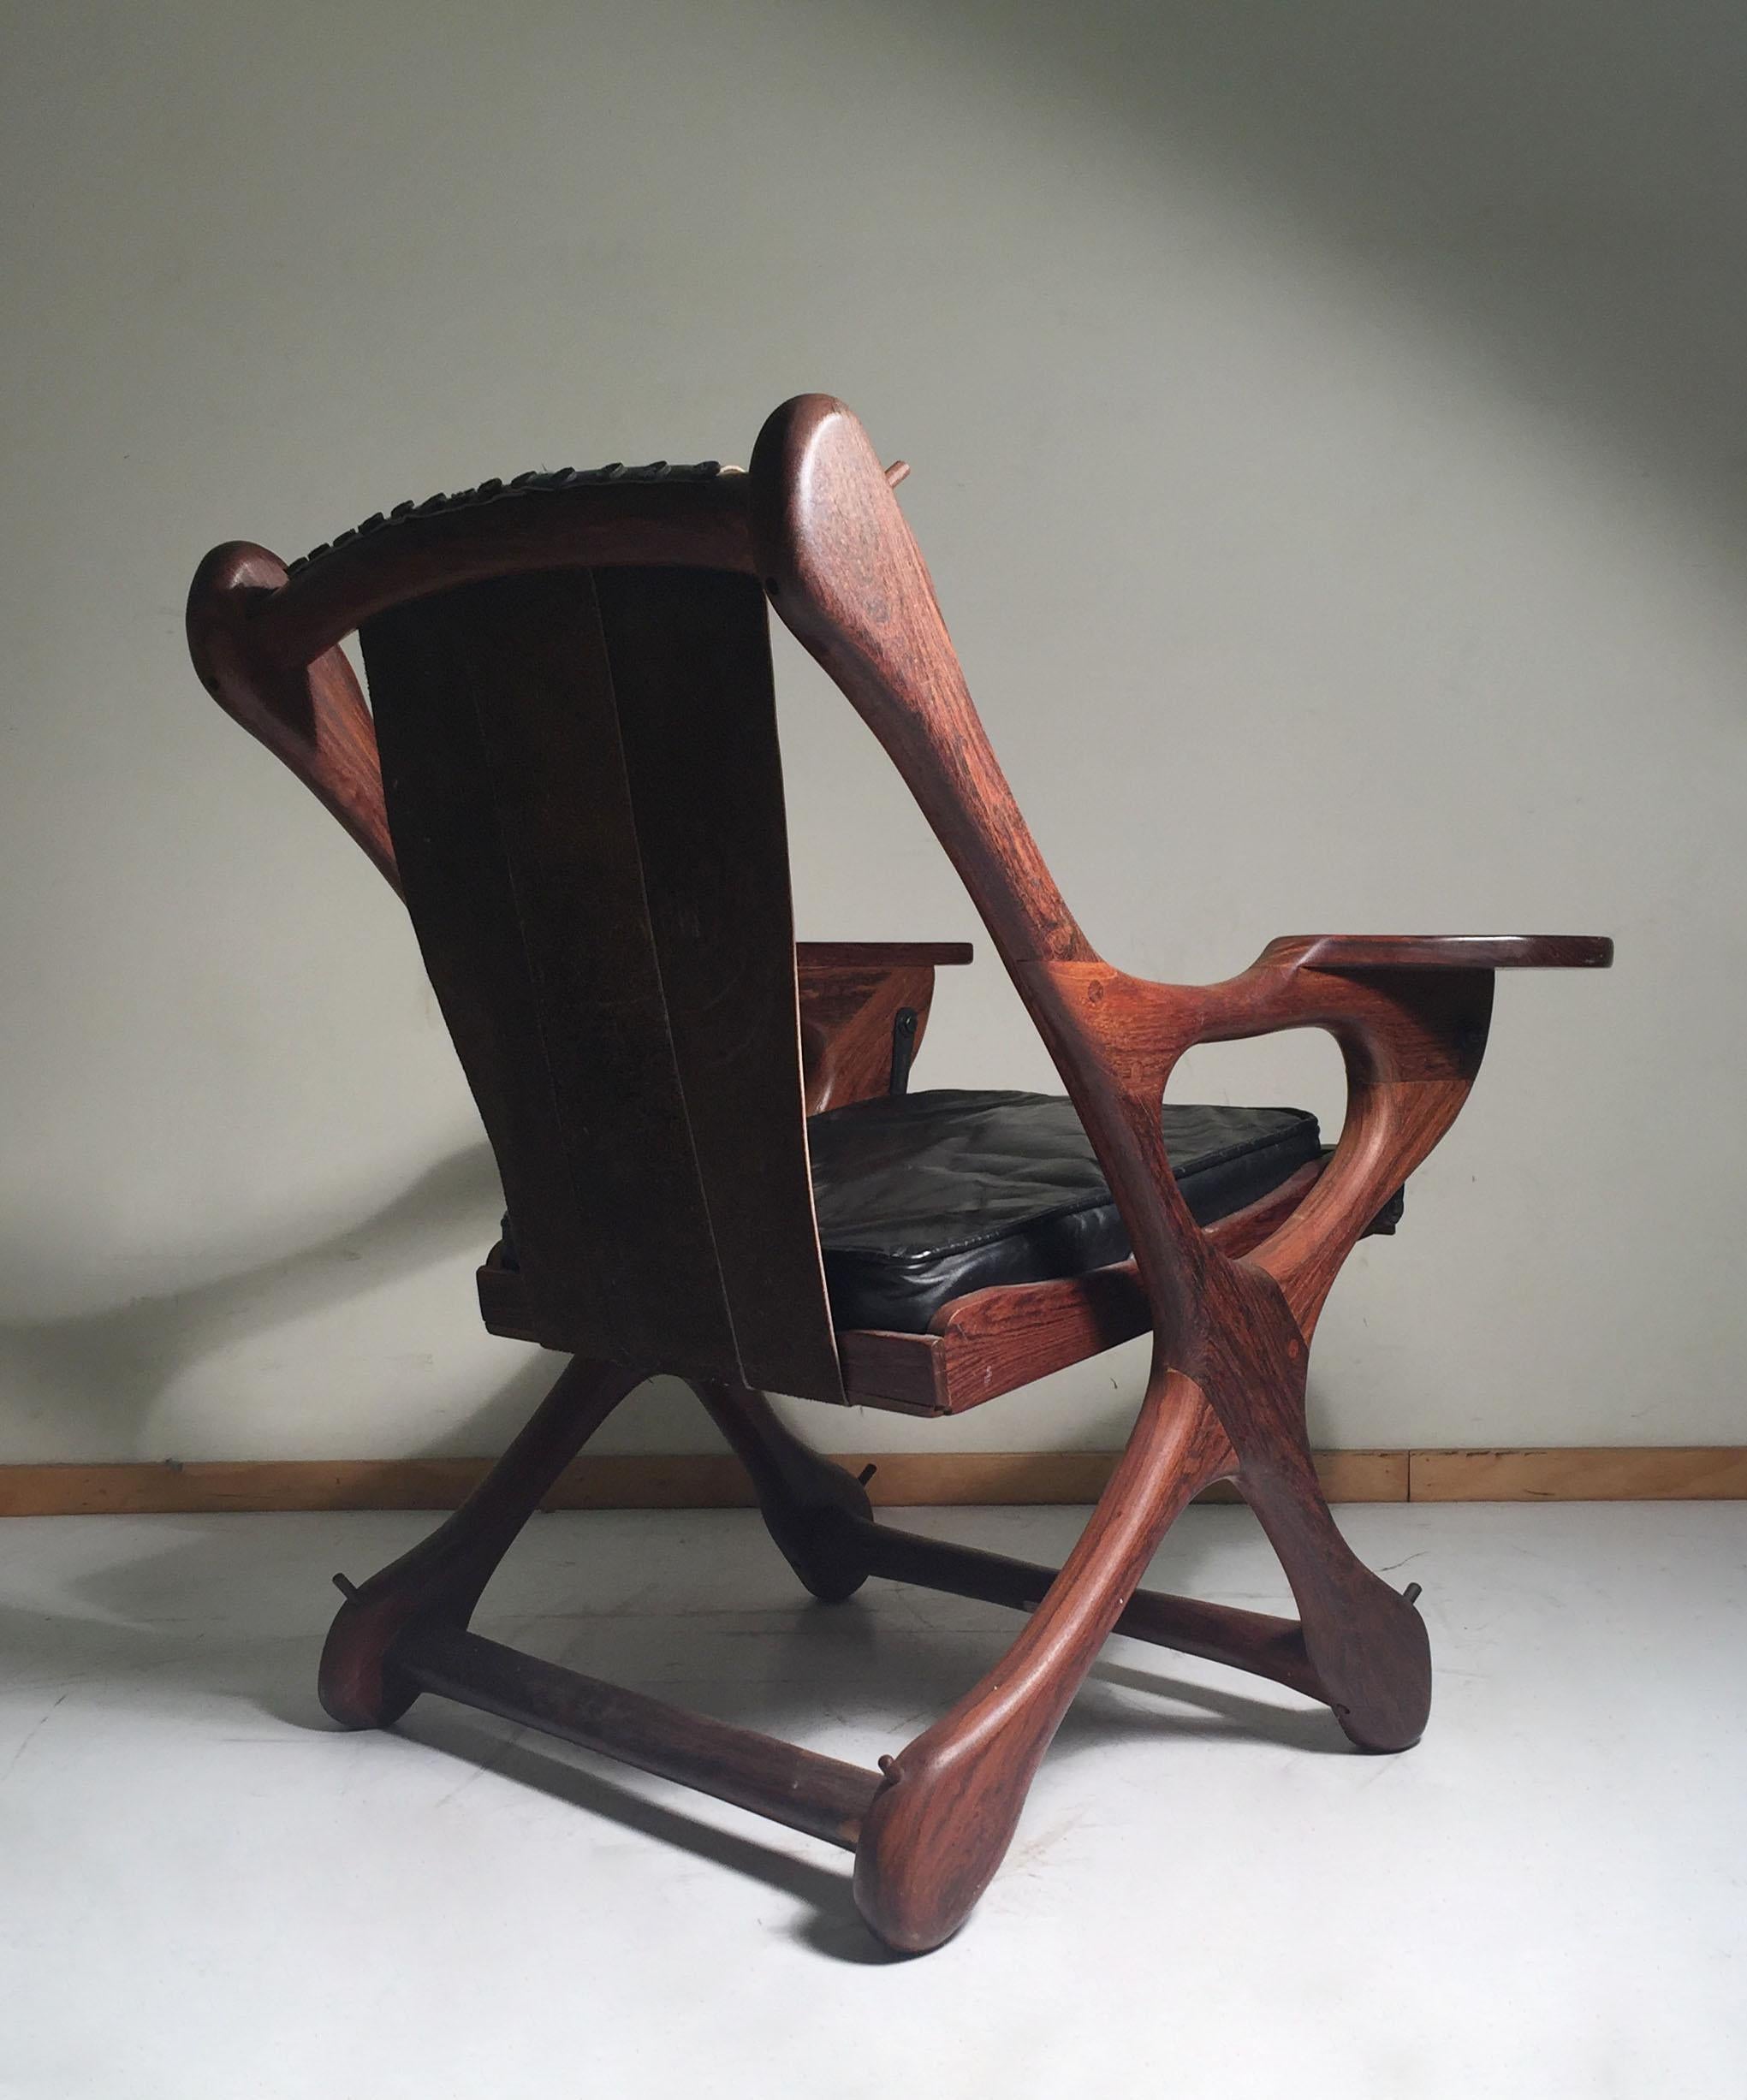 20th Century Vintage Don Shoemaker Rosewood Swinger Chair Signed Senal, Mexico For Sale